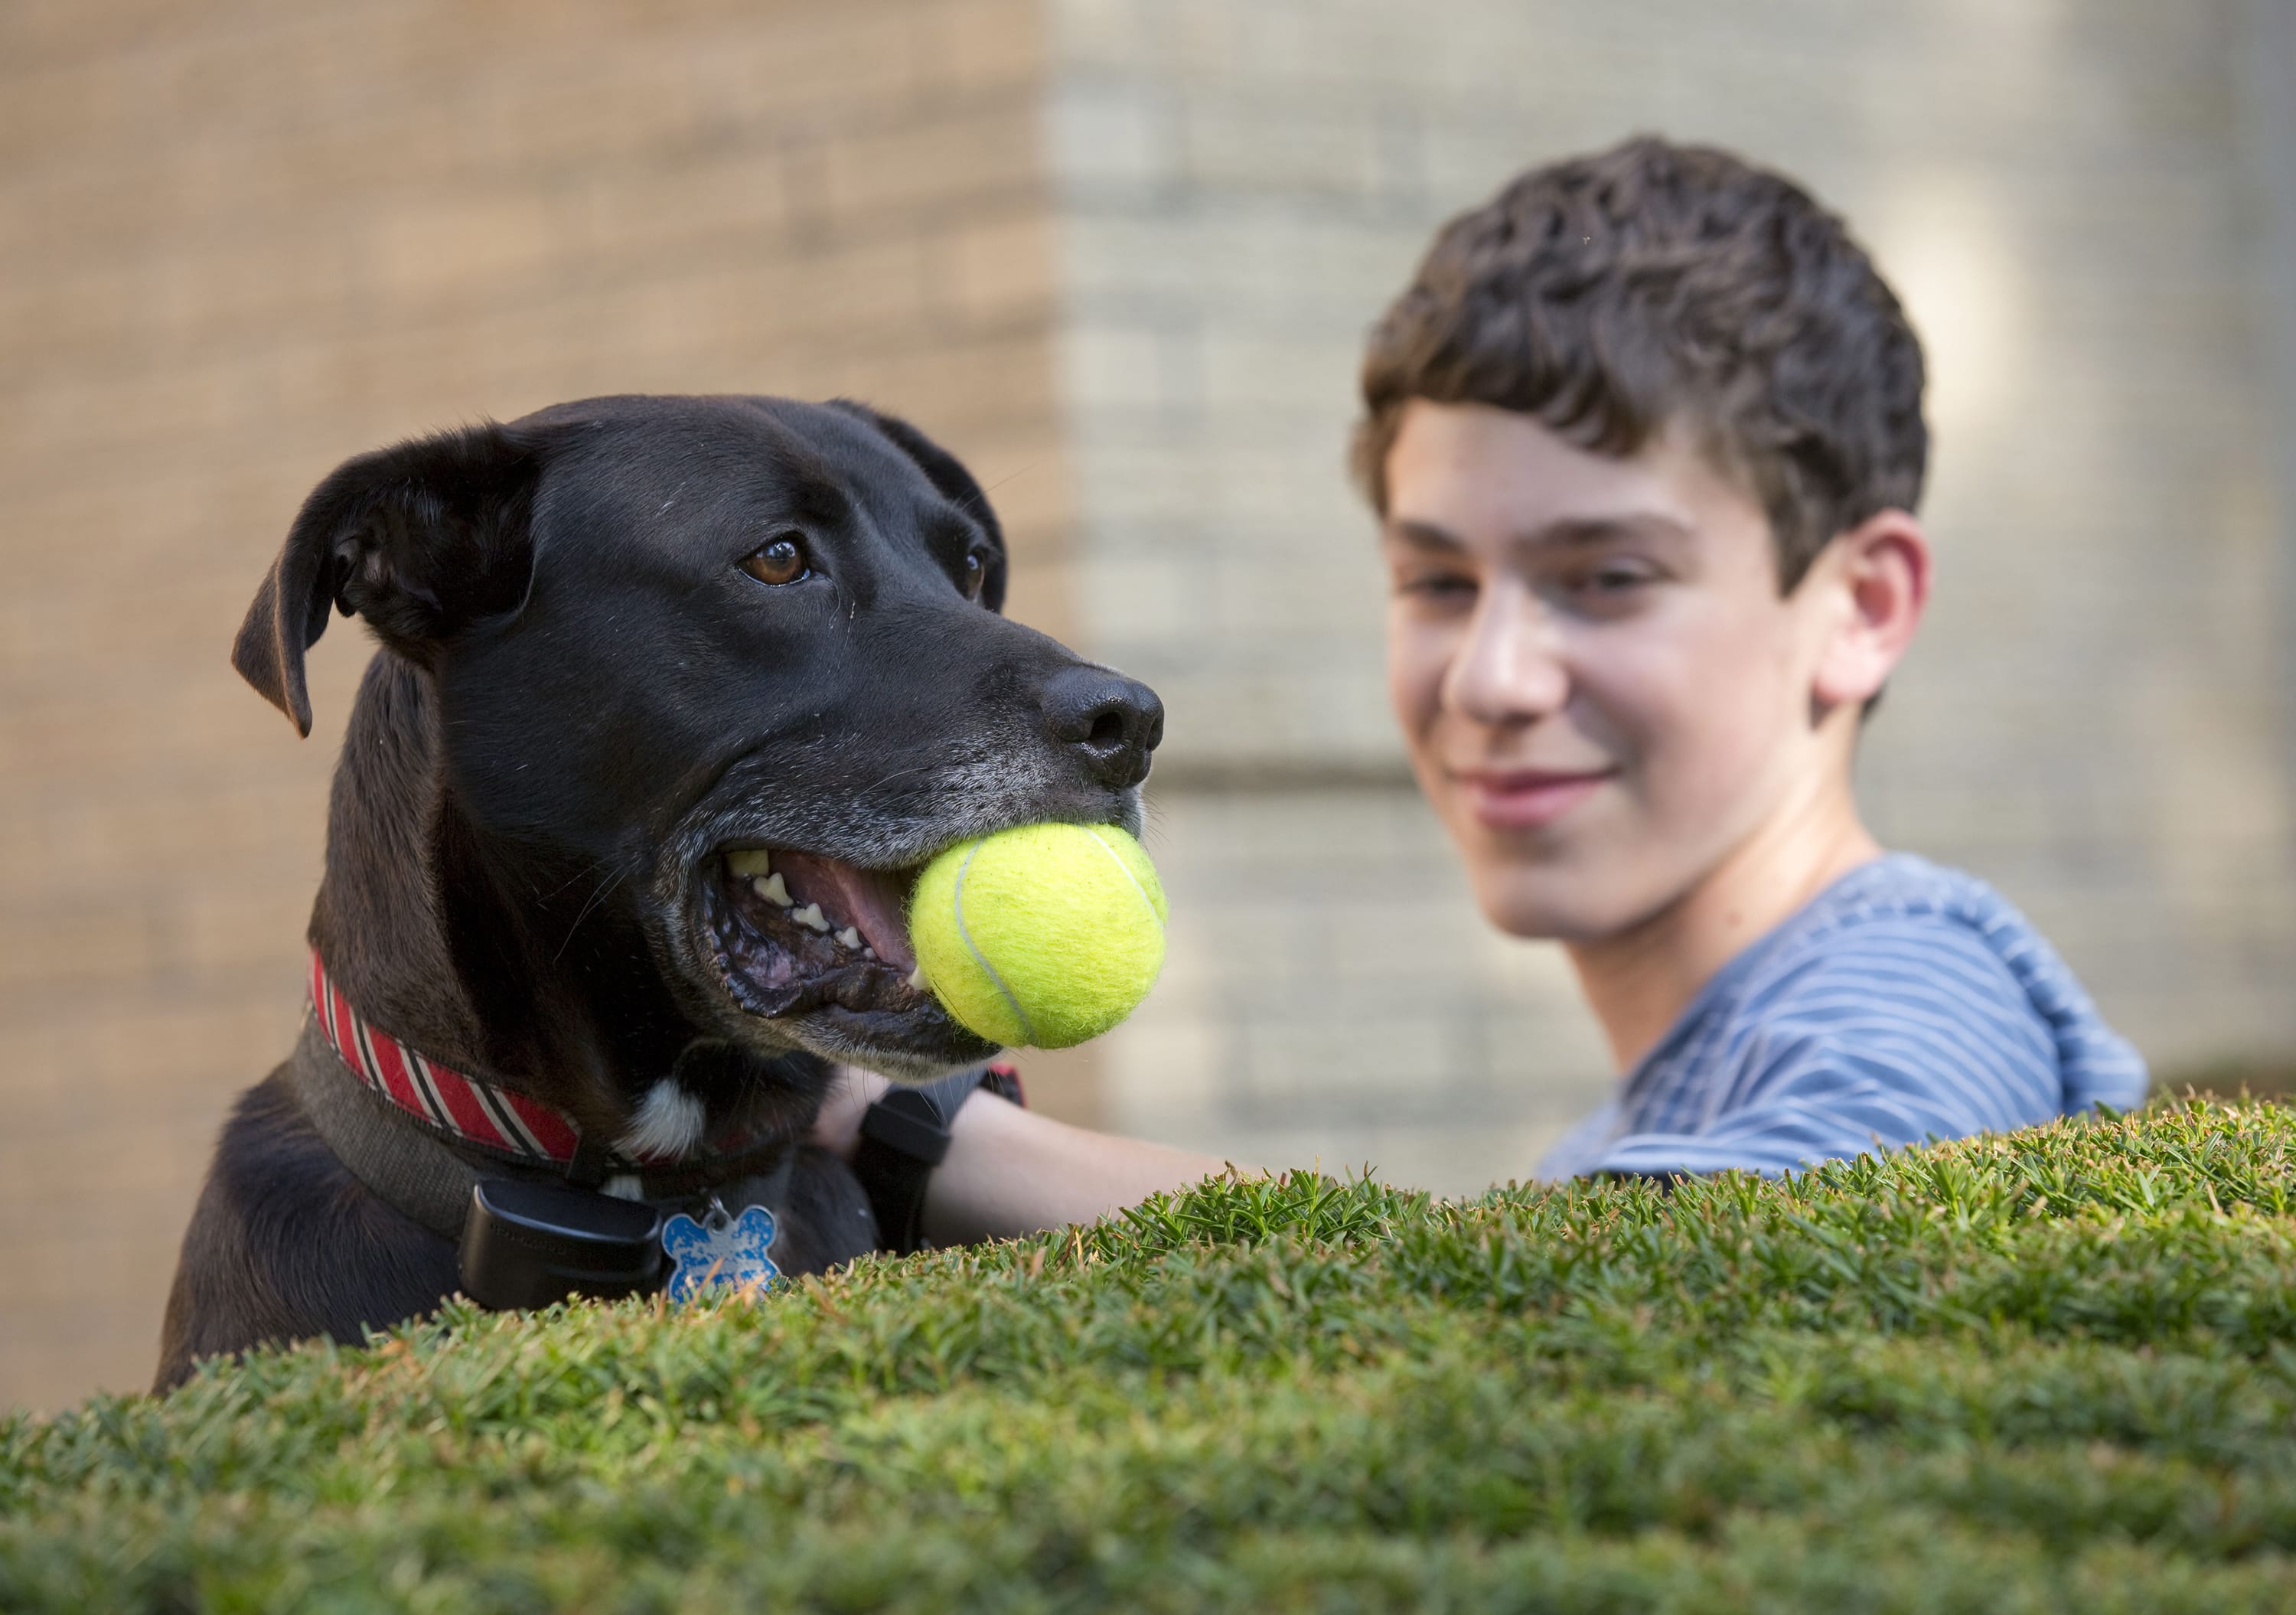 Jacob Rubin, 14, plays with his dog Bailey at his home in Long Grove, Ill., on Friday. Rubin and his brother Jonathan signed up their dog -- Bailey D.